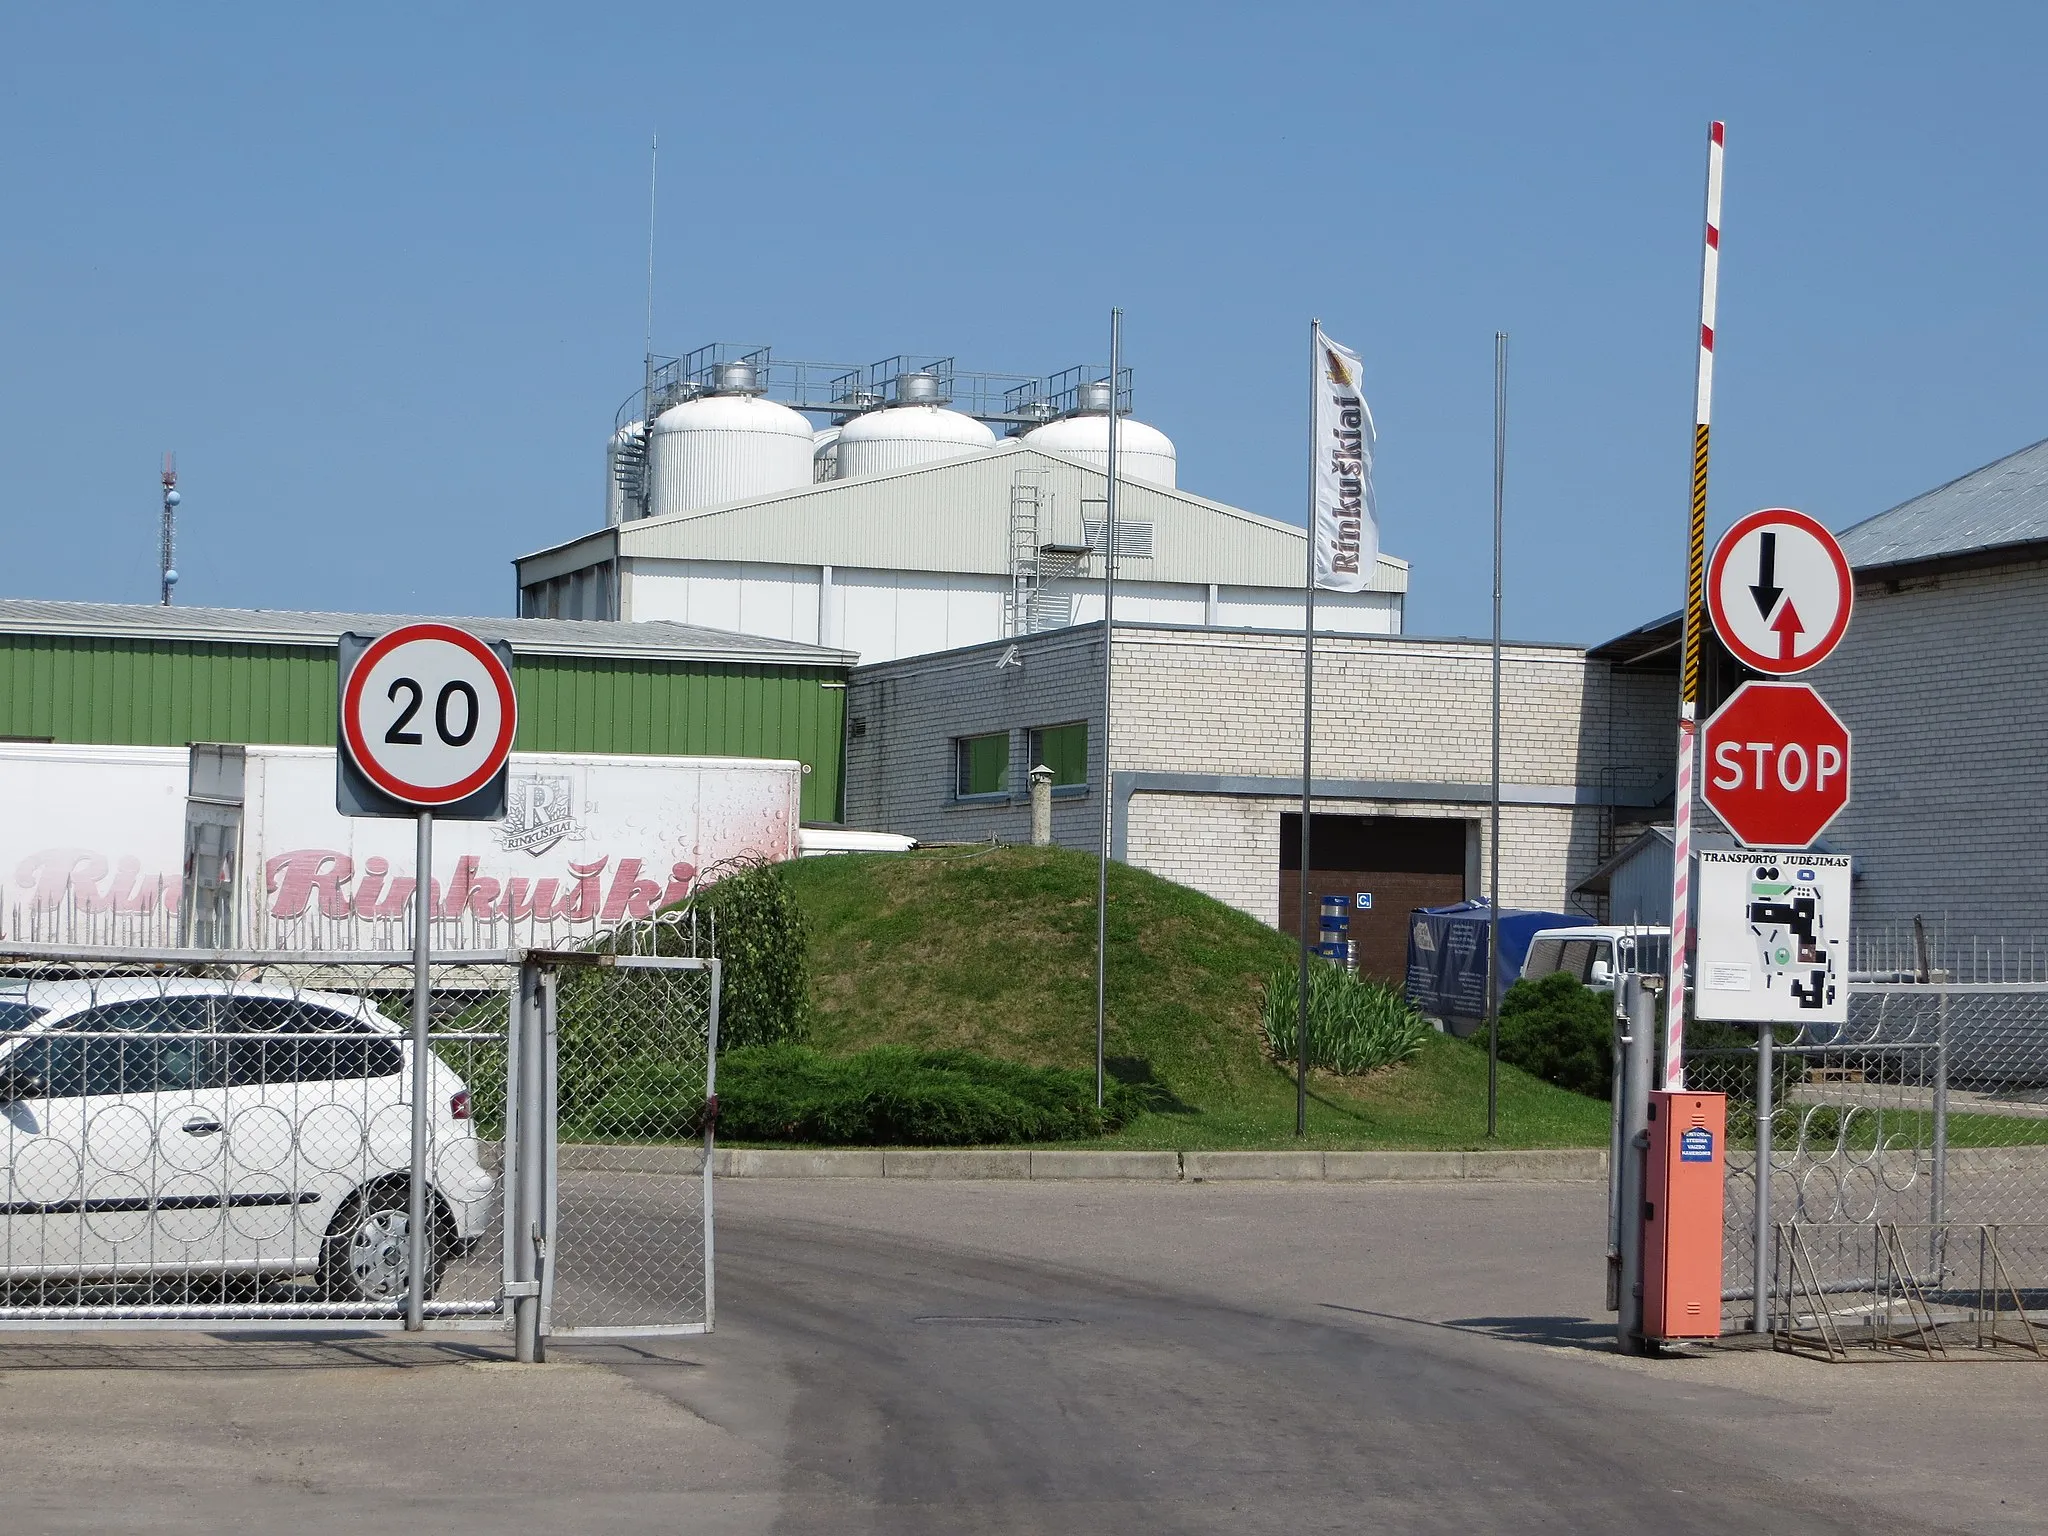 Photo showing: Looking in through the gates at Rinkuškiai brewery established in 1991 just outside Biržai, Lithuania.